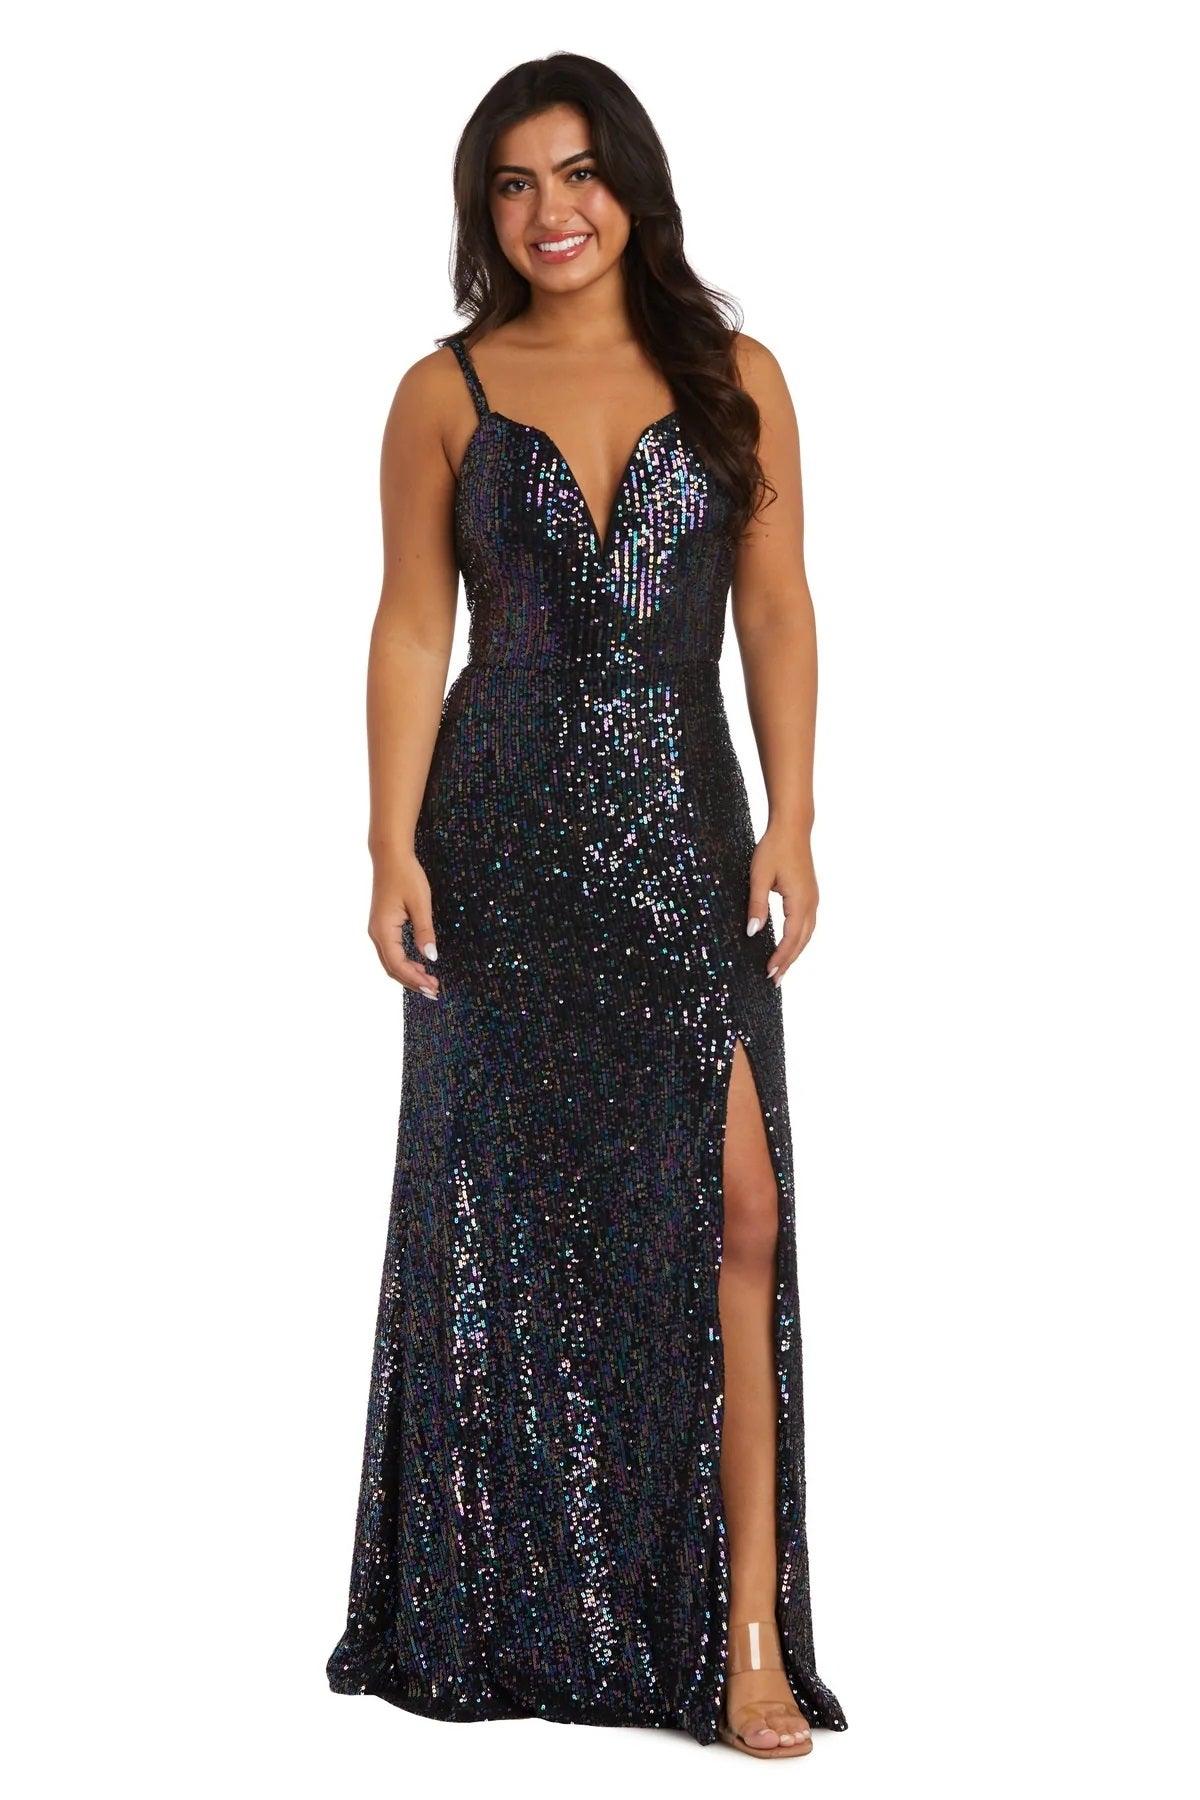 Morgan & Co Long Fitted Formal Prom Gown 12935 - The Dress Outlet